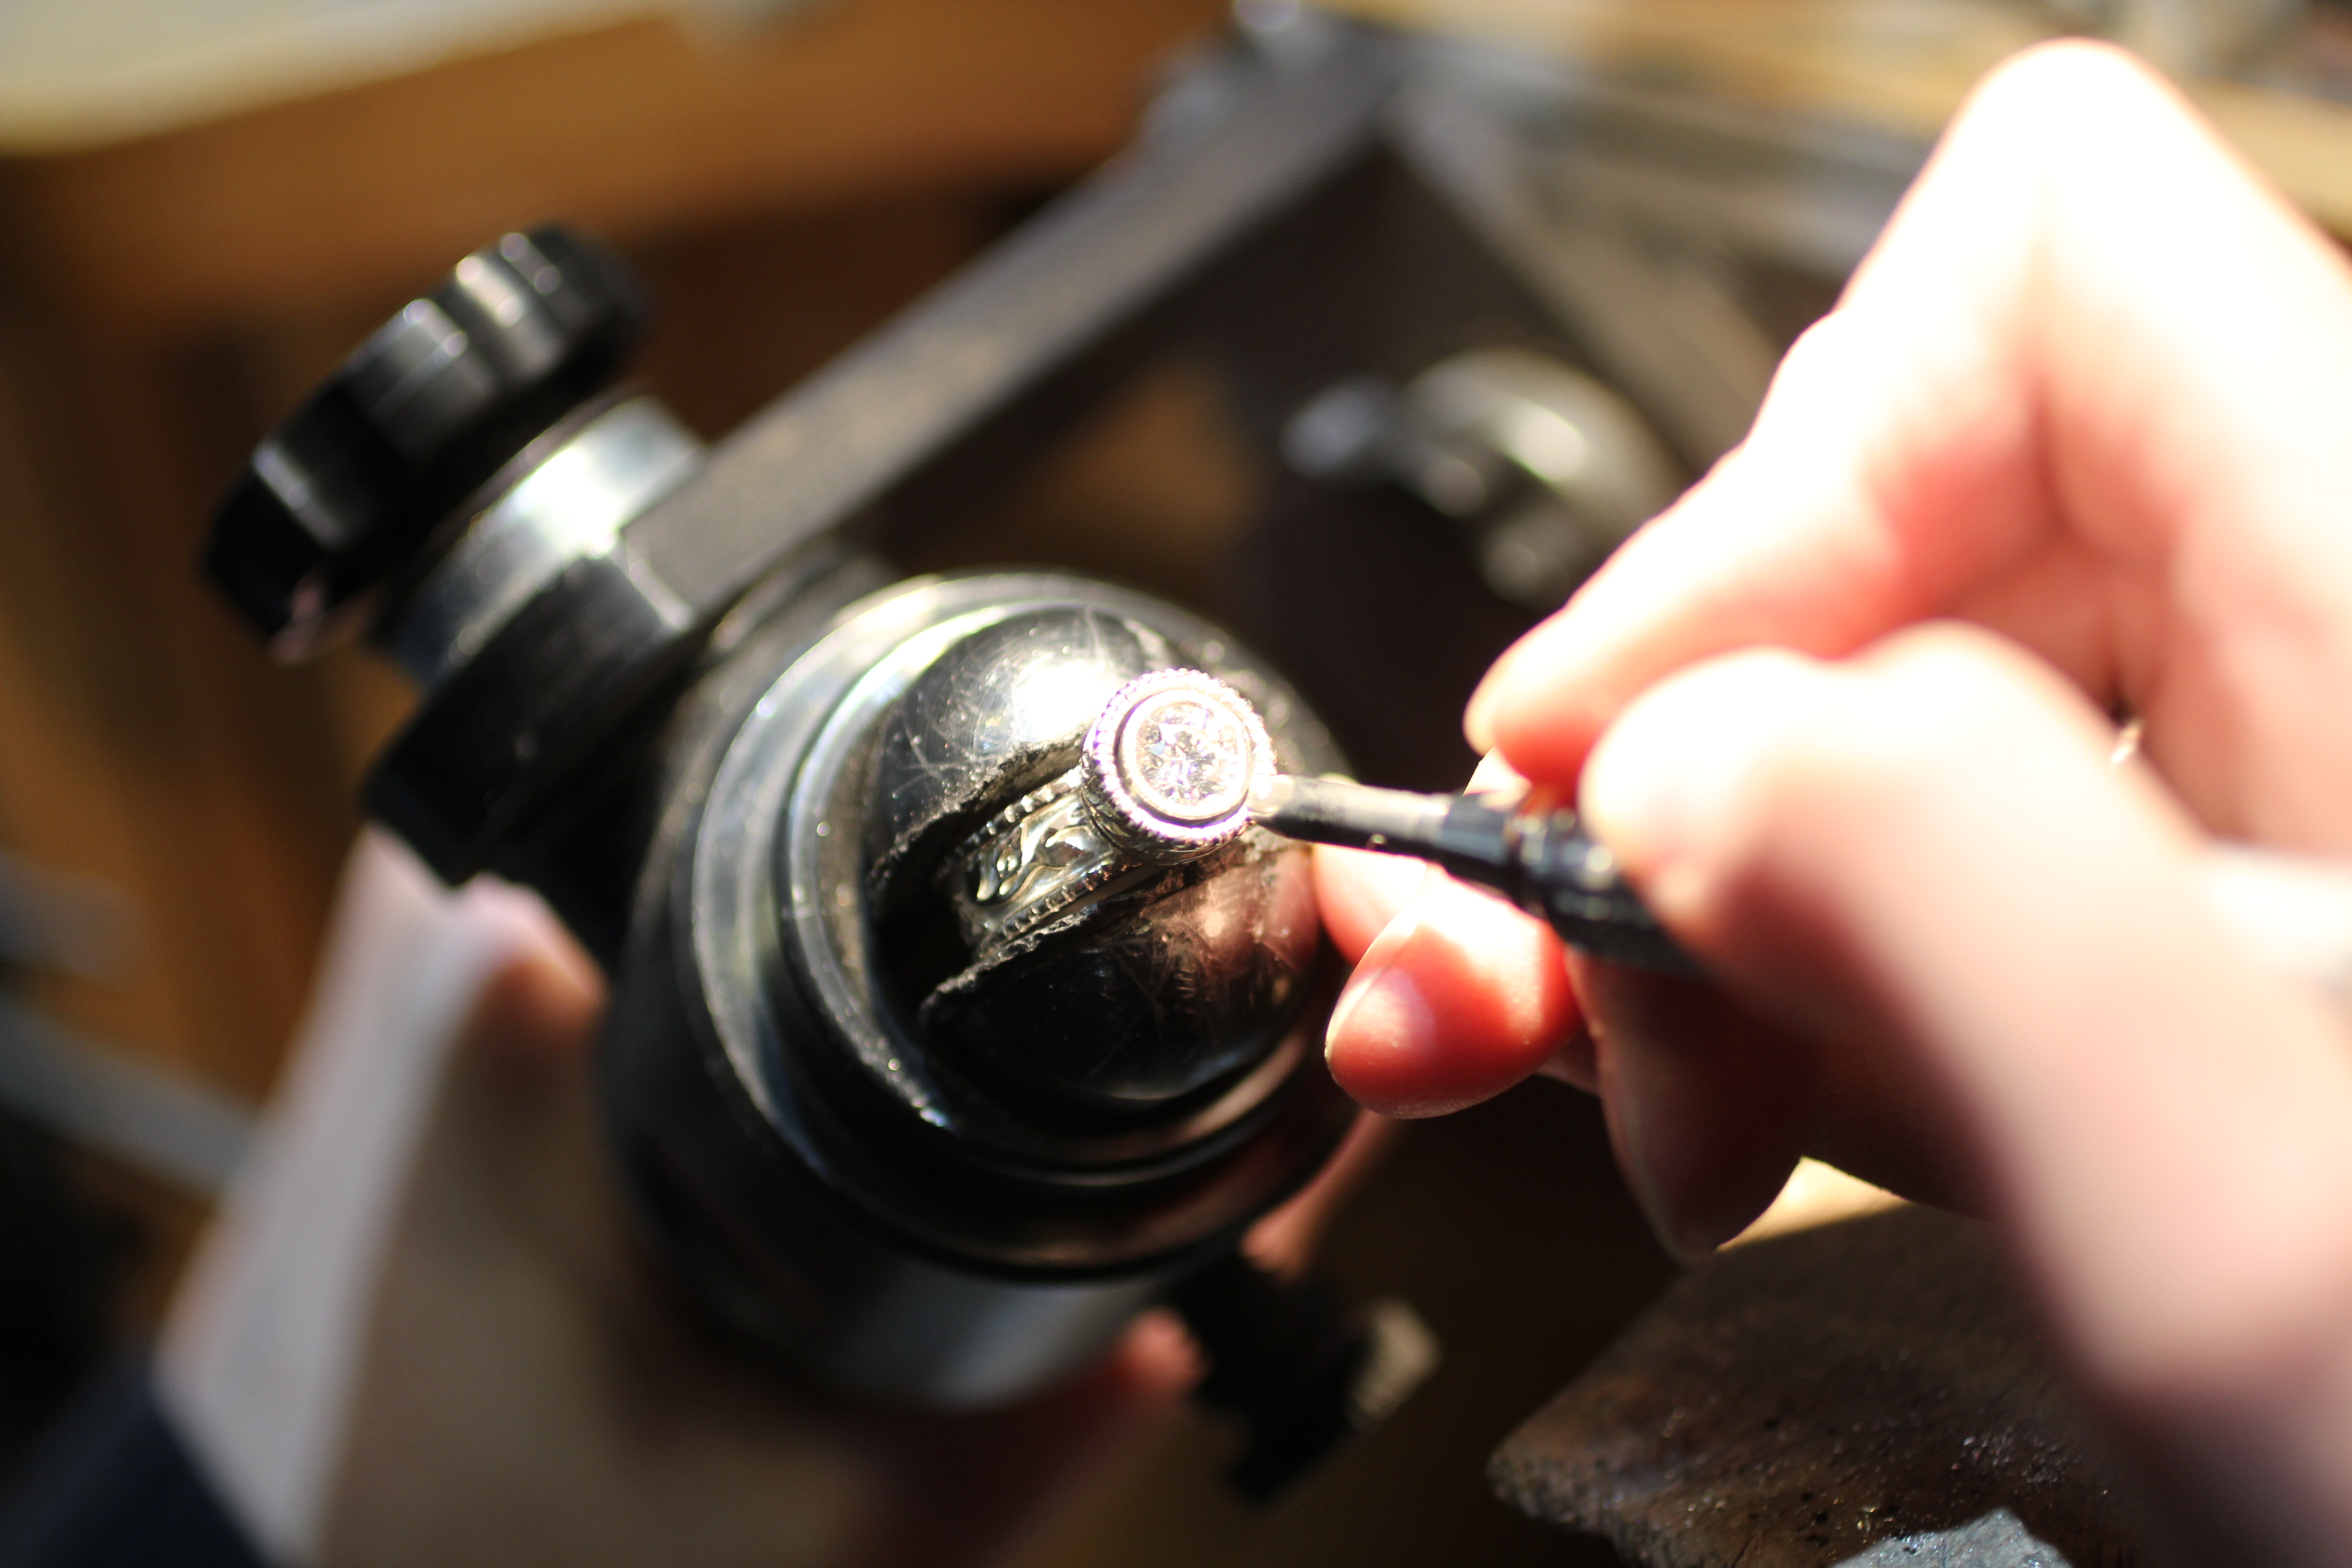 Here, one of our jewelers is shown setting a diamond into a custom engagement ring that uses our Flores motif.